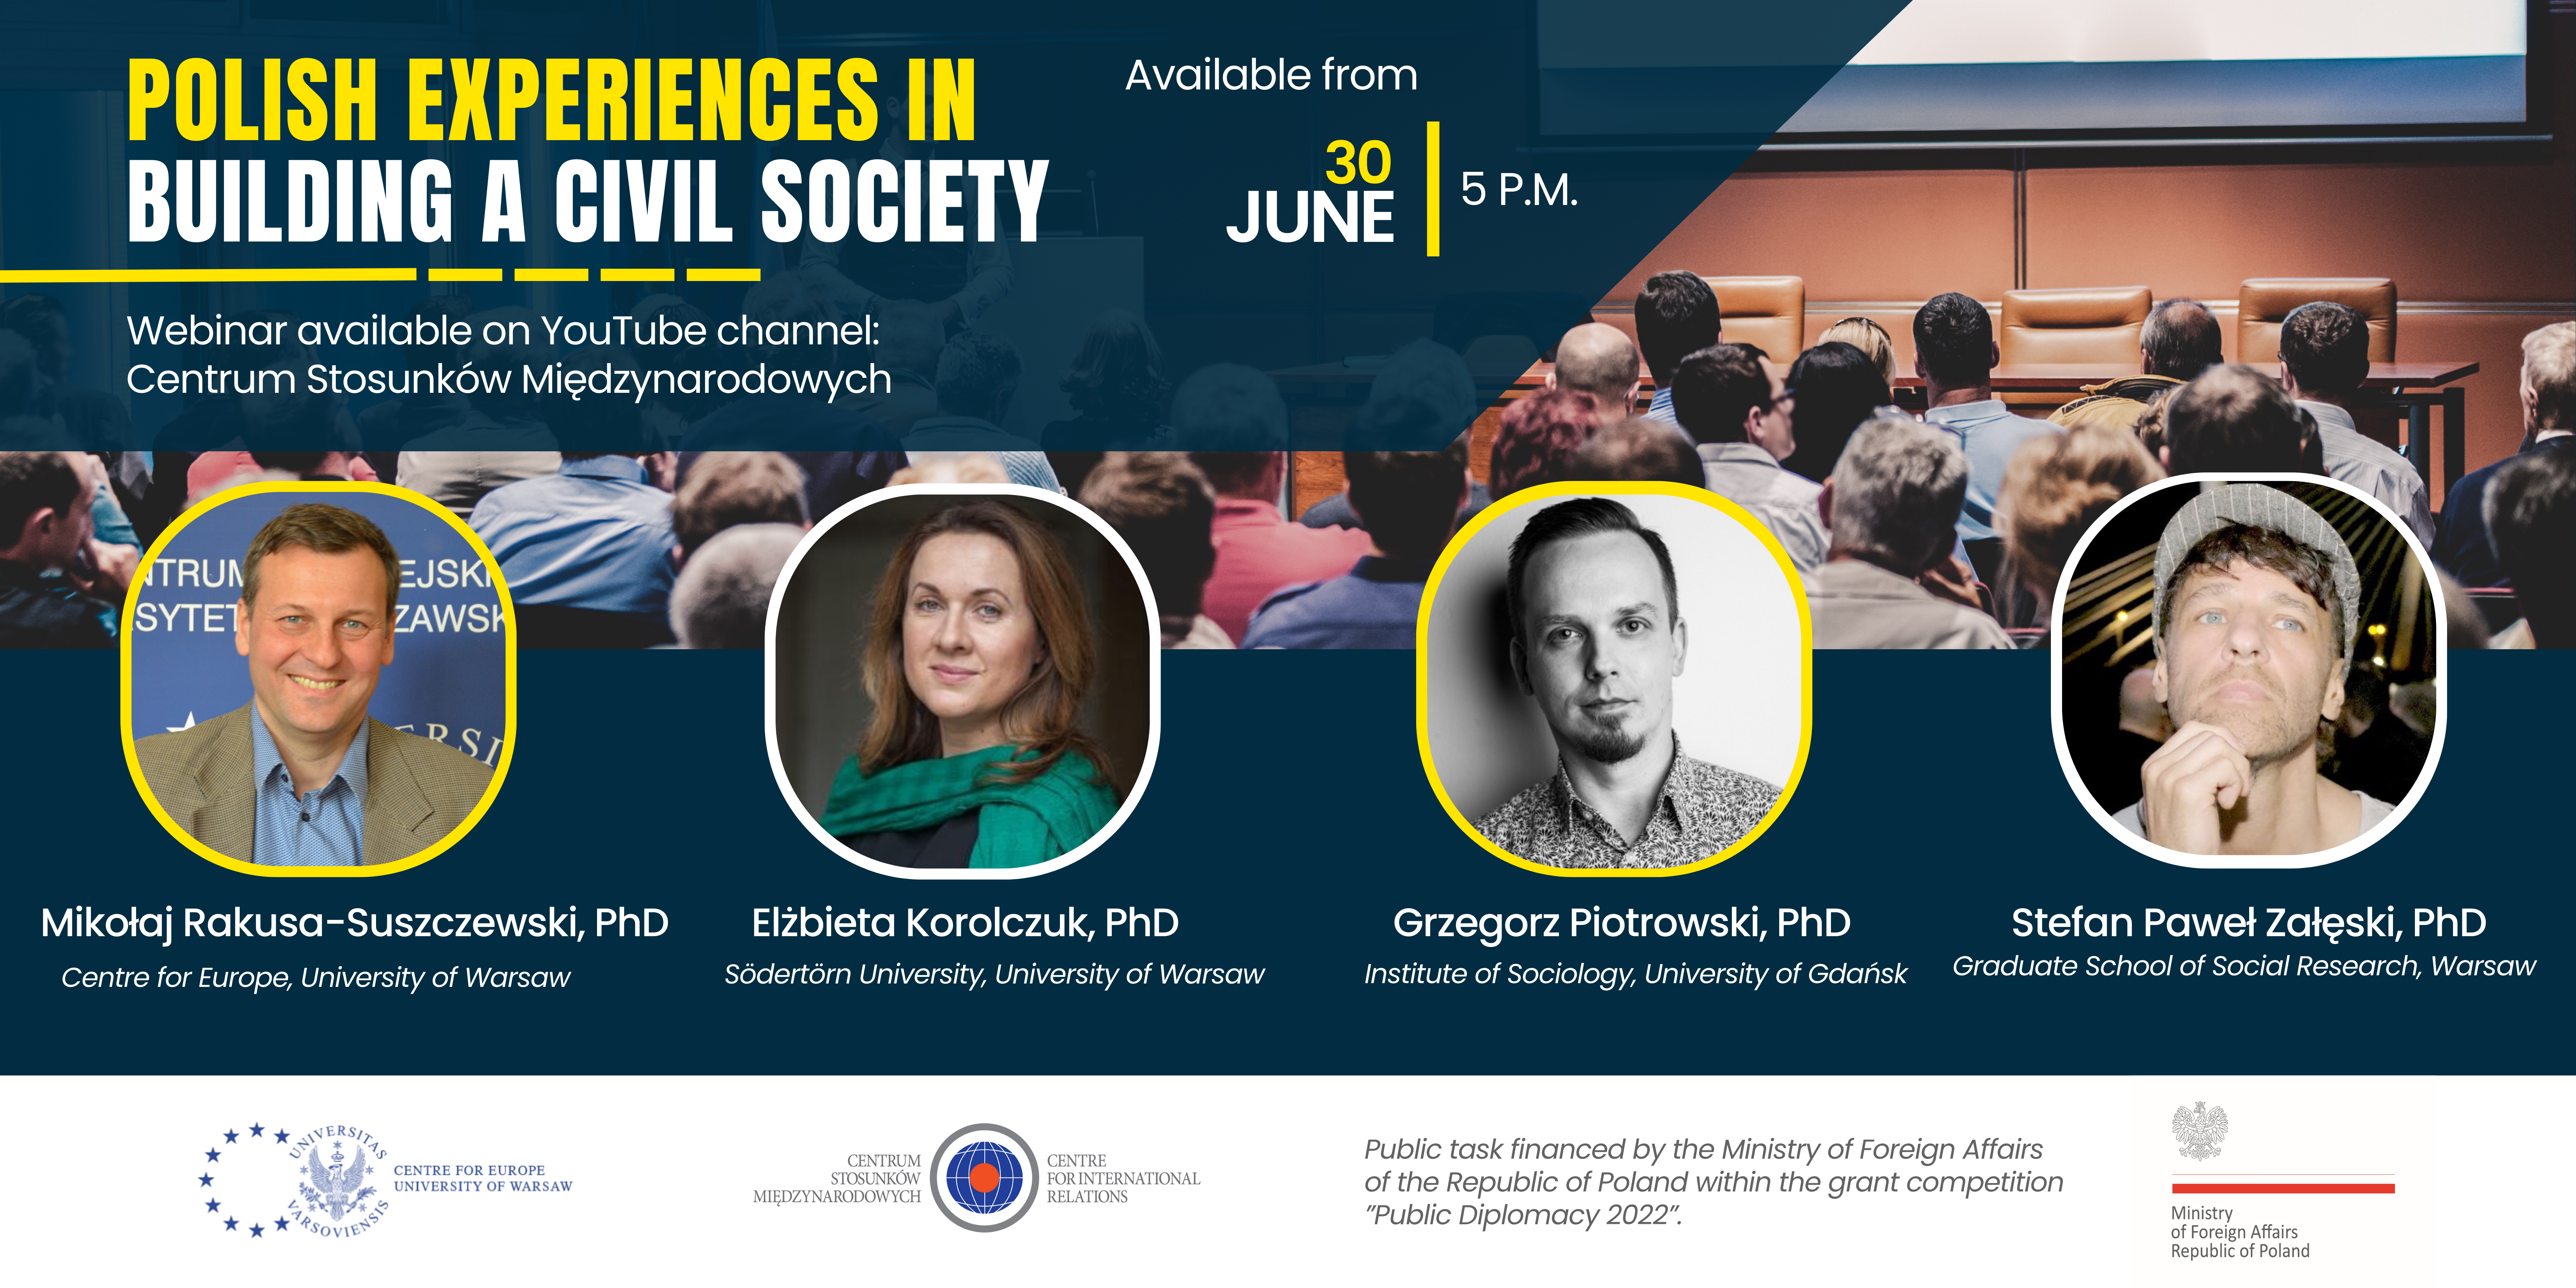 Polish experiences in building a civil society